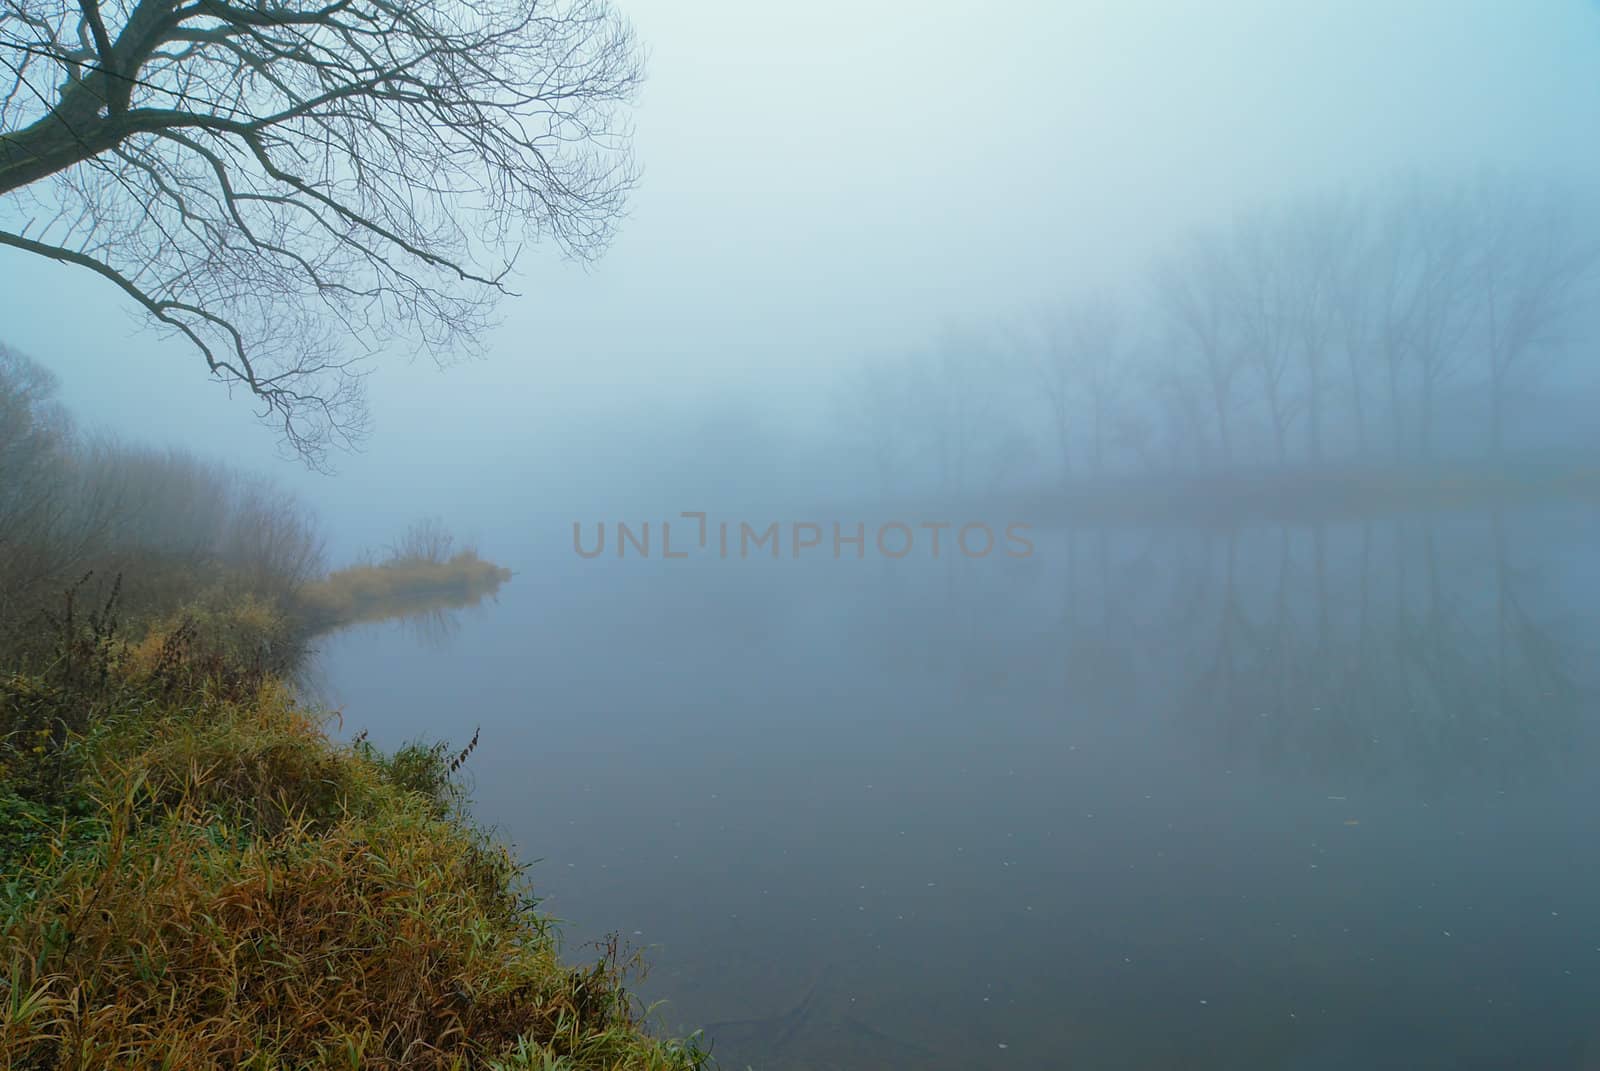 The river in a fog. Autumn morning. Cold color.